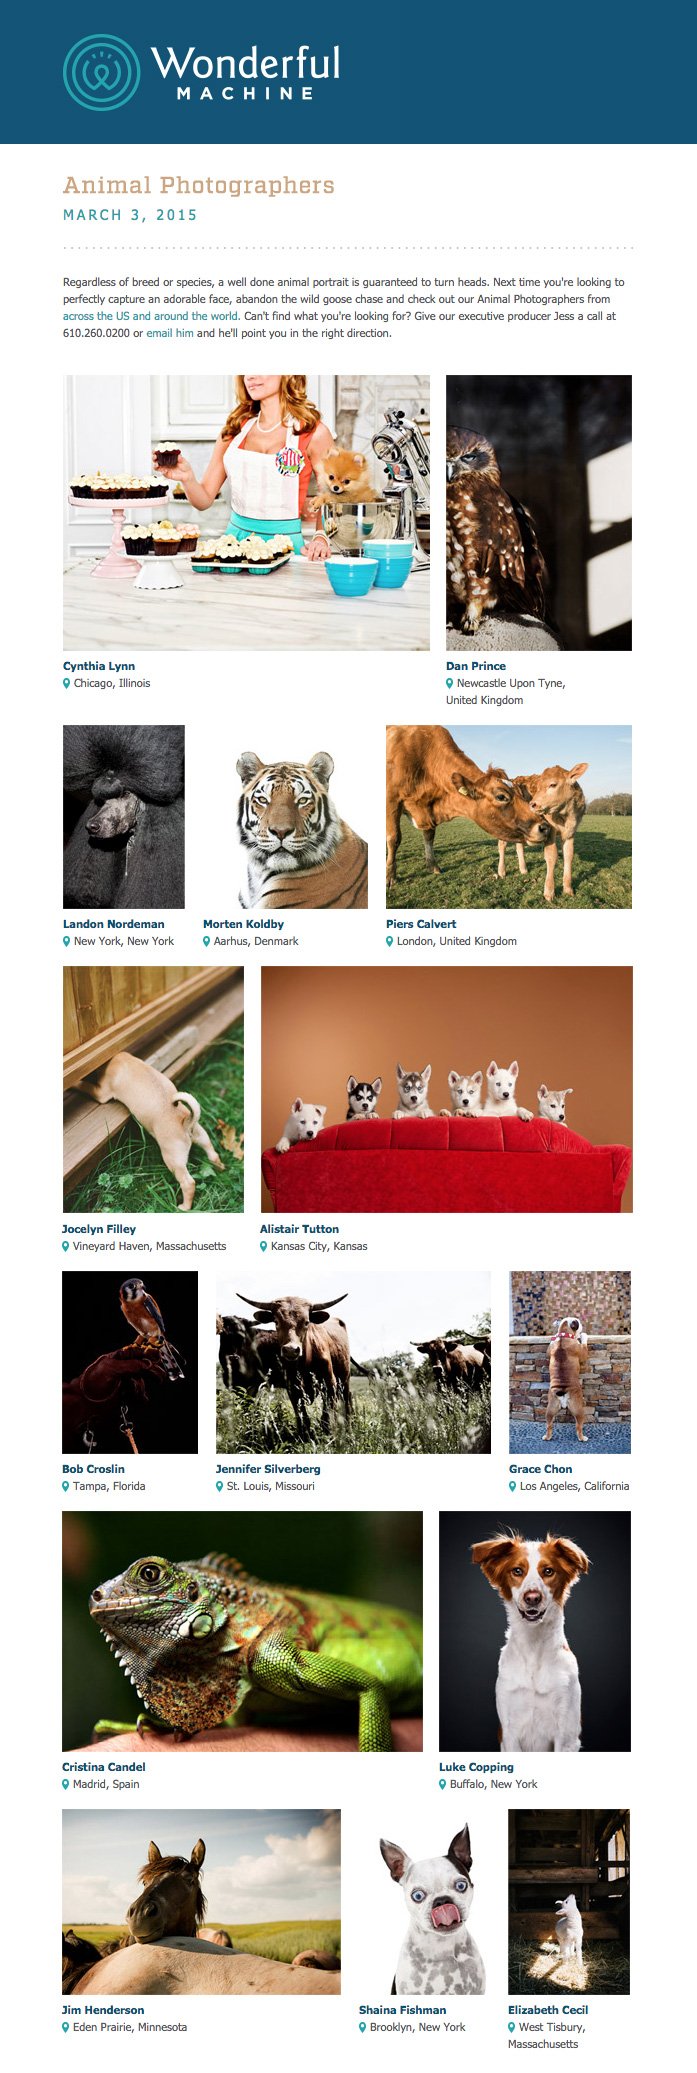 screenshot of Emailers: March 3, 2015 showing animal photography by member photographers